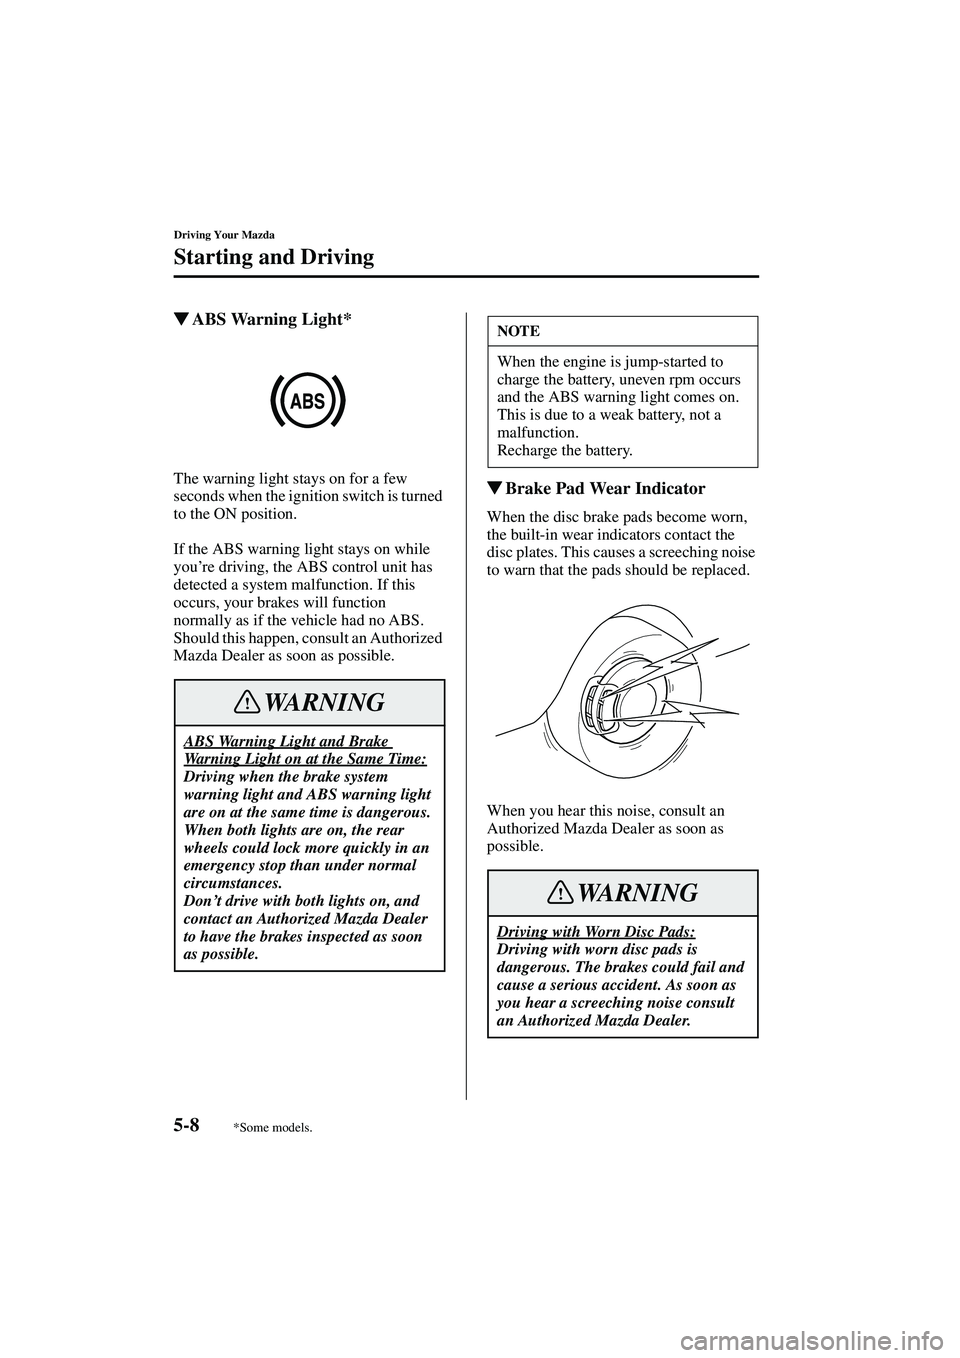 MAZDA MODEL MX-5 MIATA 2004  Owners Manual 5-8
Driving Your Mazda
Starting and Driving
Form No. 8S15-EA-03G
ABS Warning Light*
The warning light stays on for a few 
seconds when the ignition switch is turned 
to the ON position.
If the ABS wa